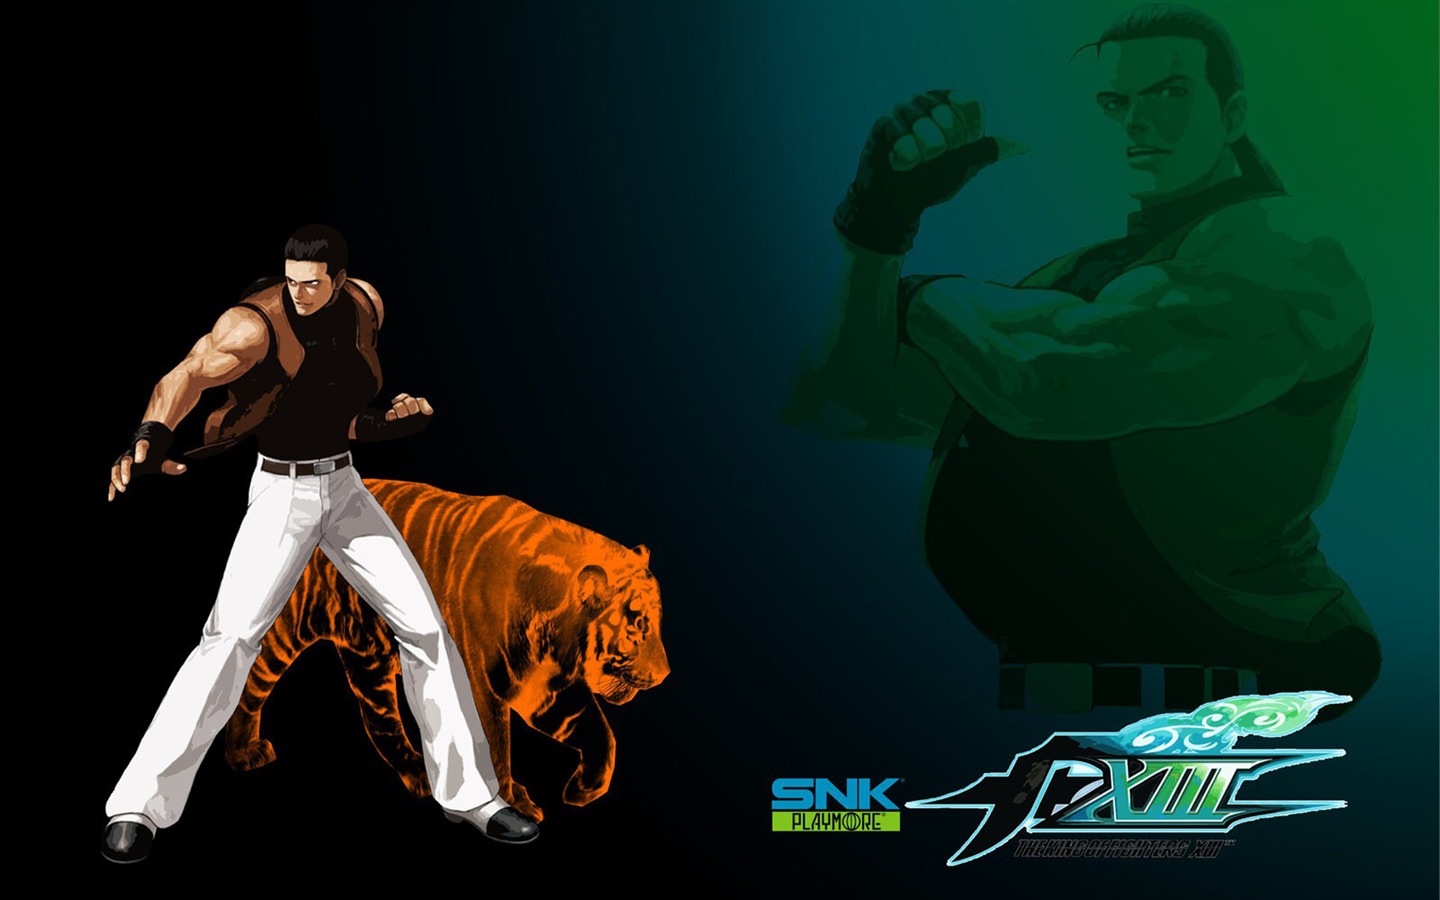 The King of Fighters XIII wallpapers #17 - 1440x900